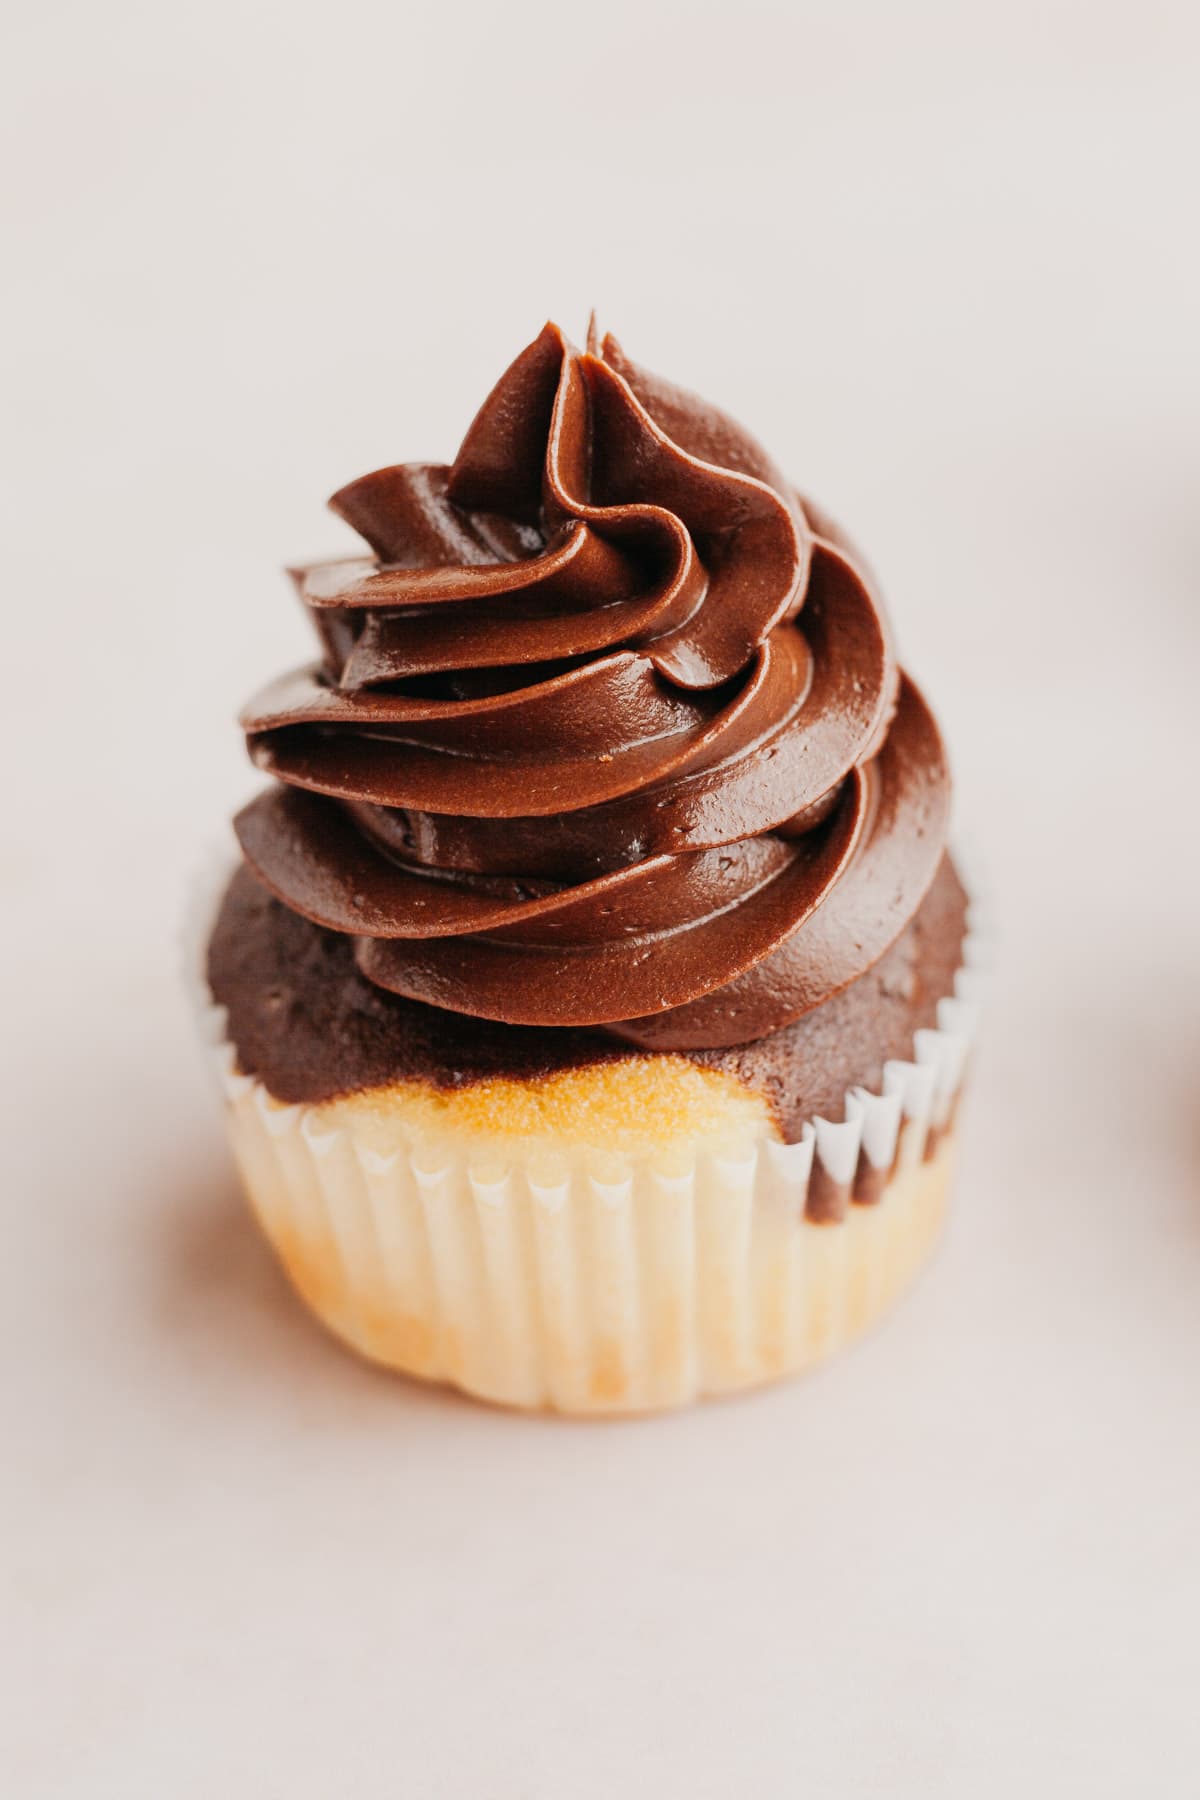 A close up of a cupcake with piped chocolate whipped ganache frosting.